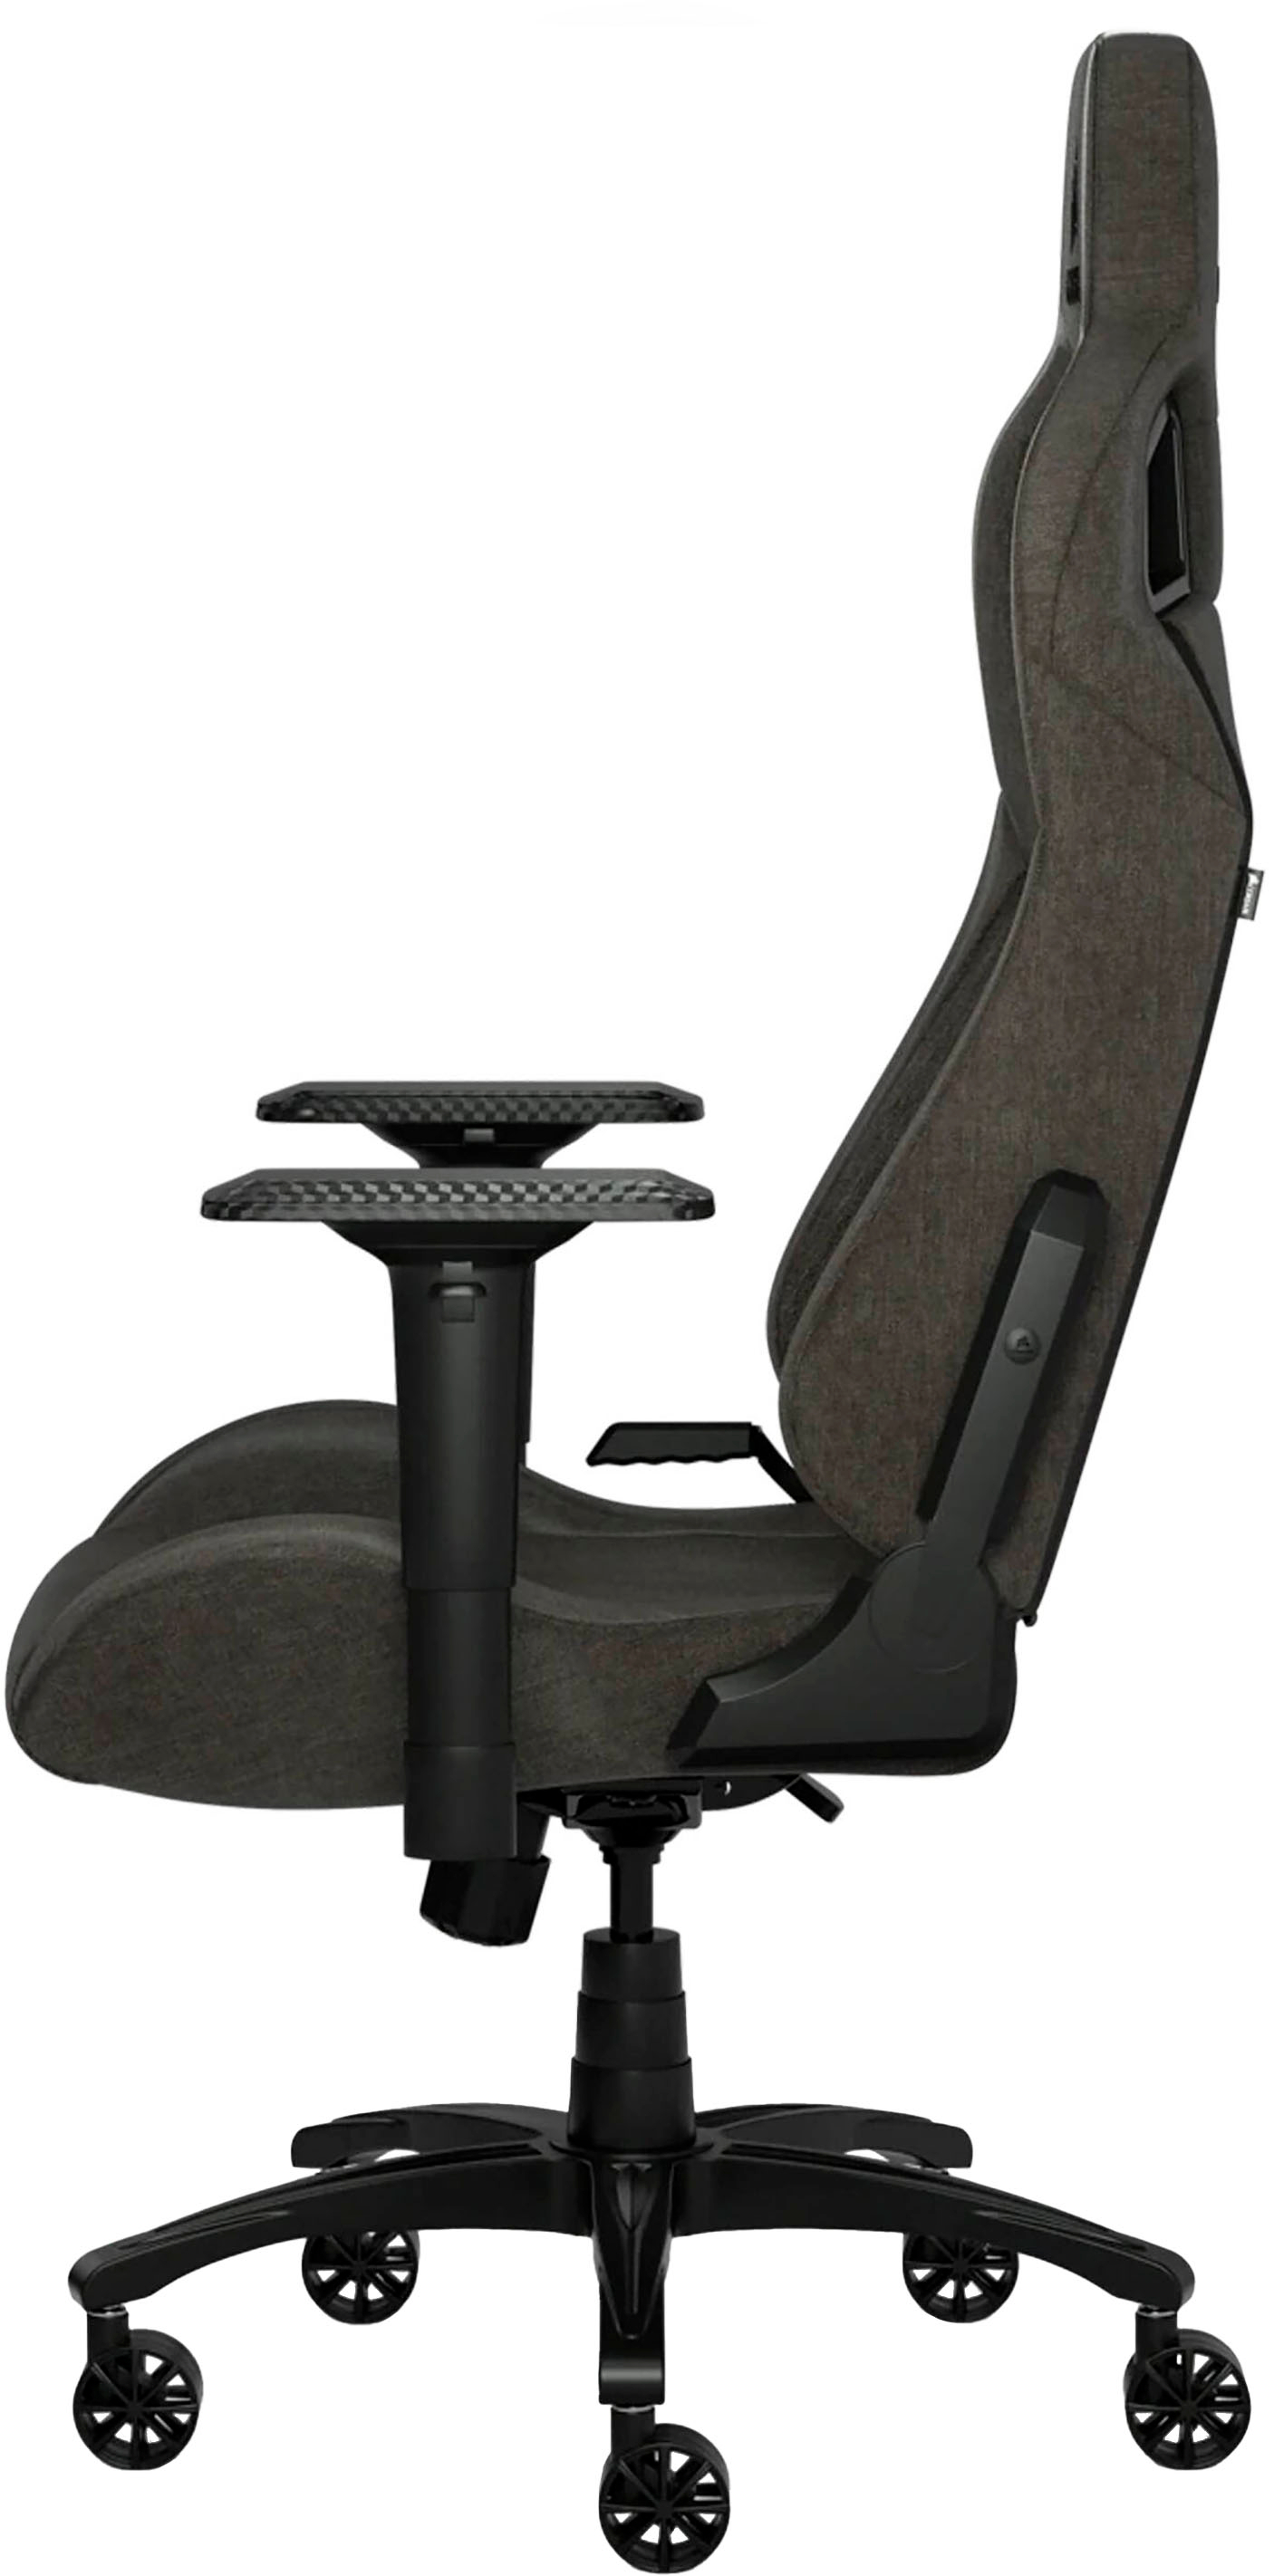 Left View: AKRacing - Core Series EX SE Fabric Gaming Chair - Carbon Black